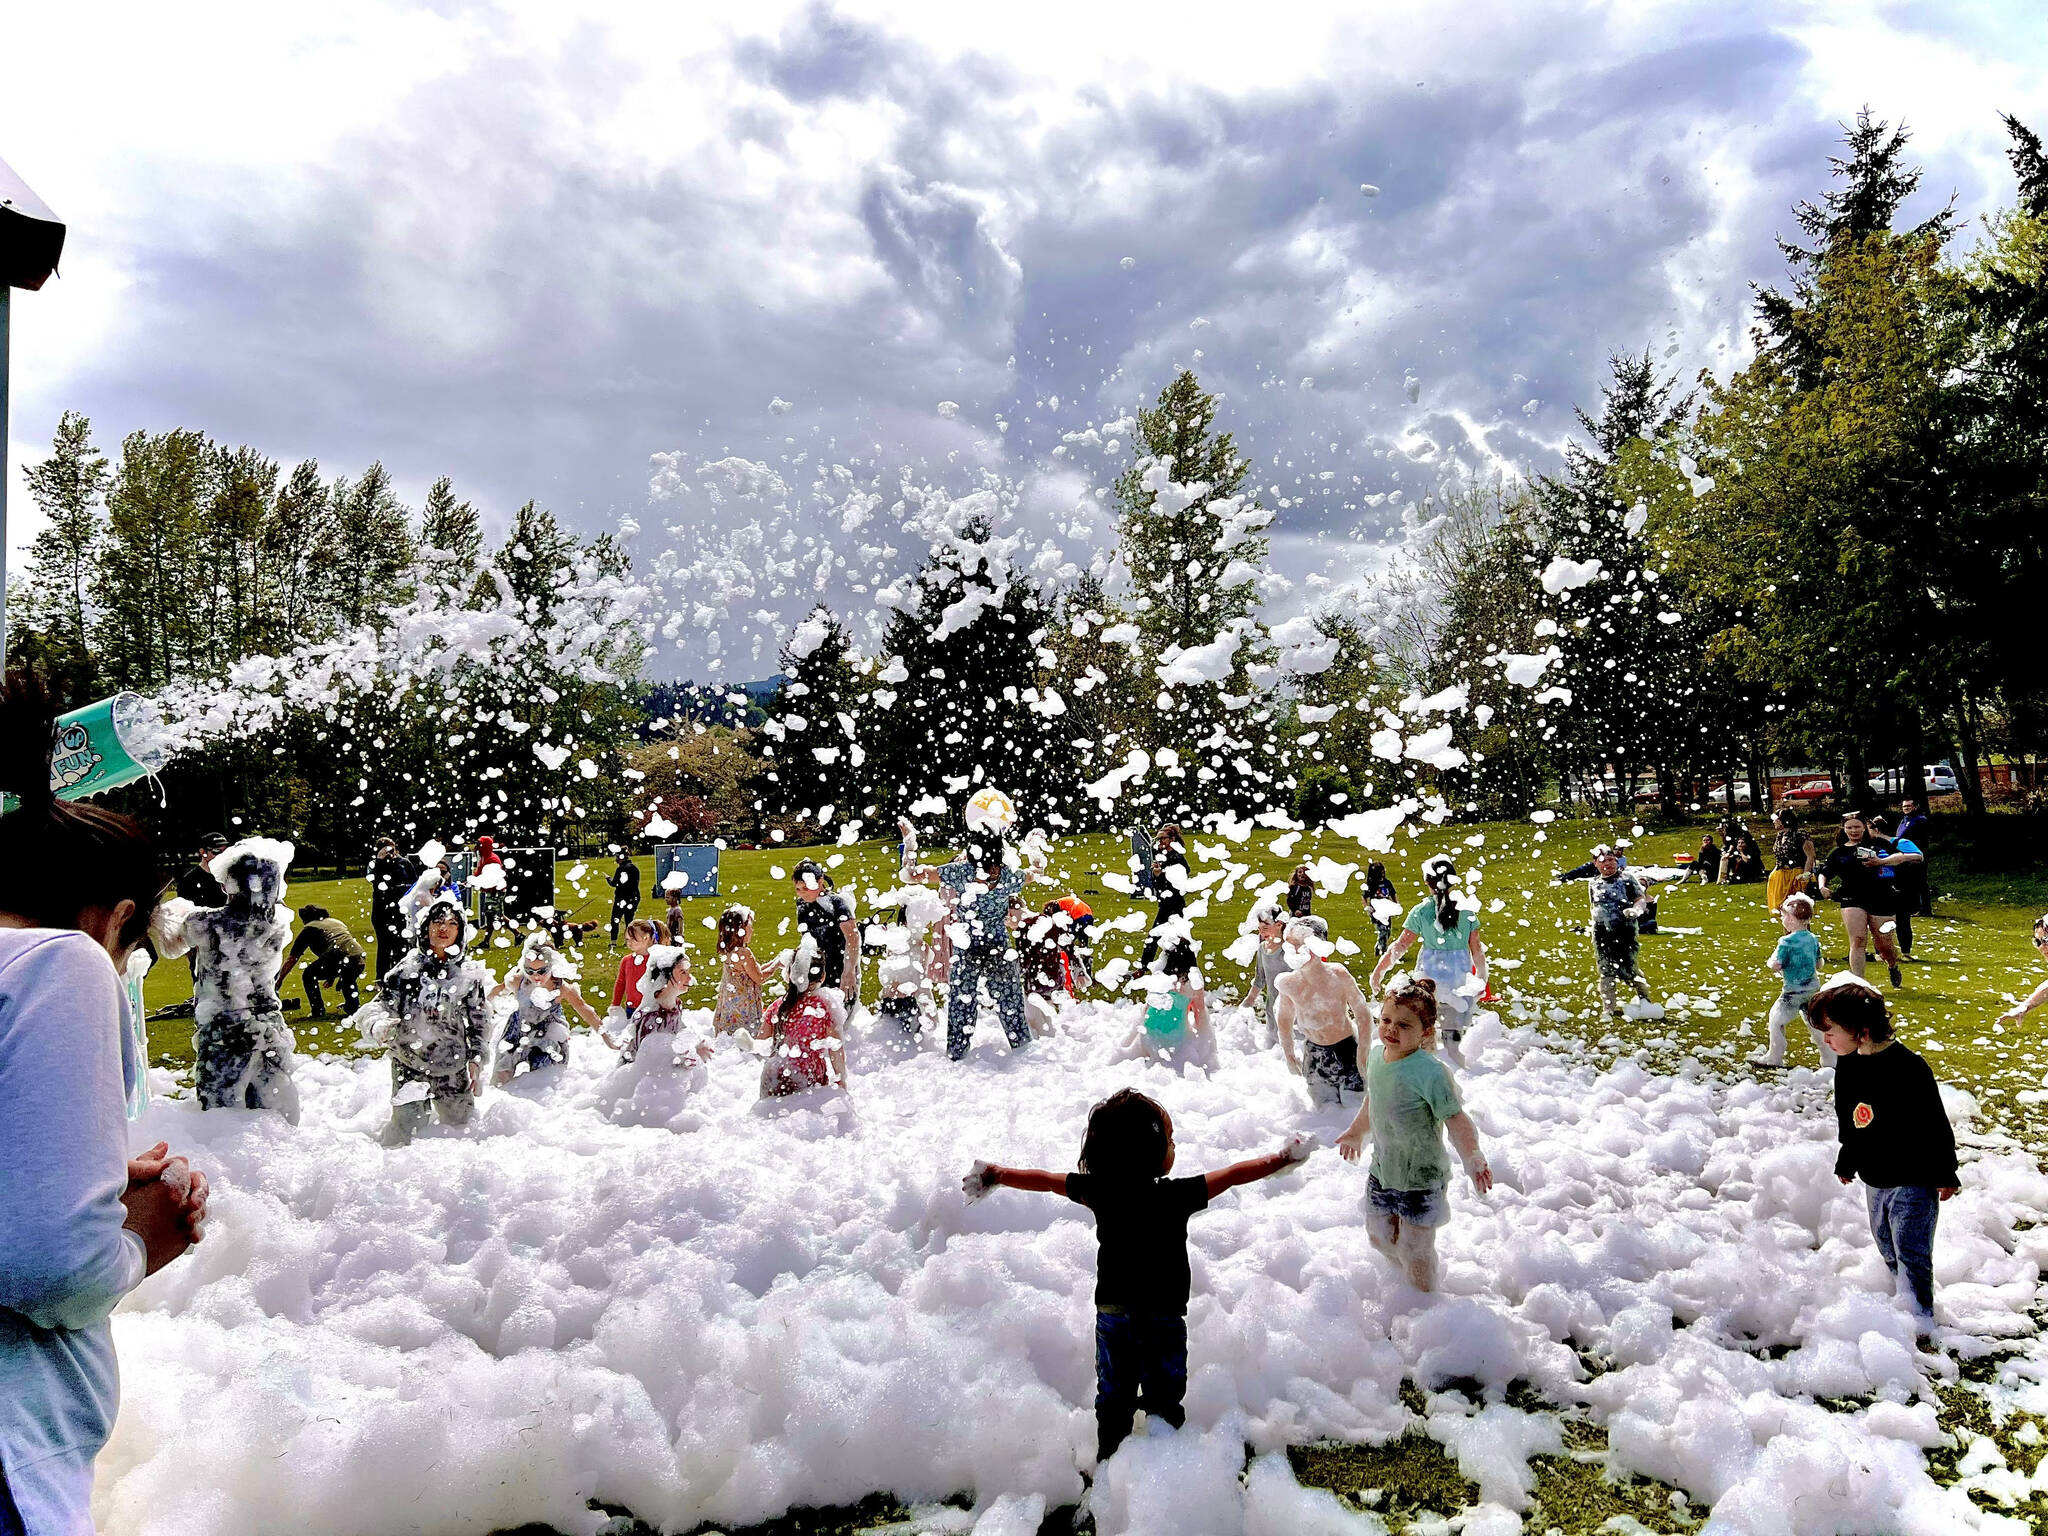 Photo by Stacy Graves
Youngsters enjoy the Strait Up Foam Fun feature at the Family Fun Day at Carrie Blake Community Park on May 7. (See more of Graves’ photos at magiccapturedbystacy.com)